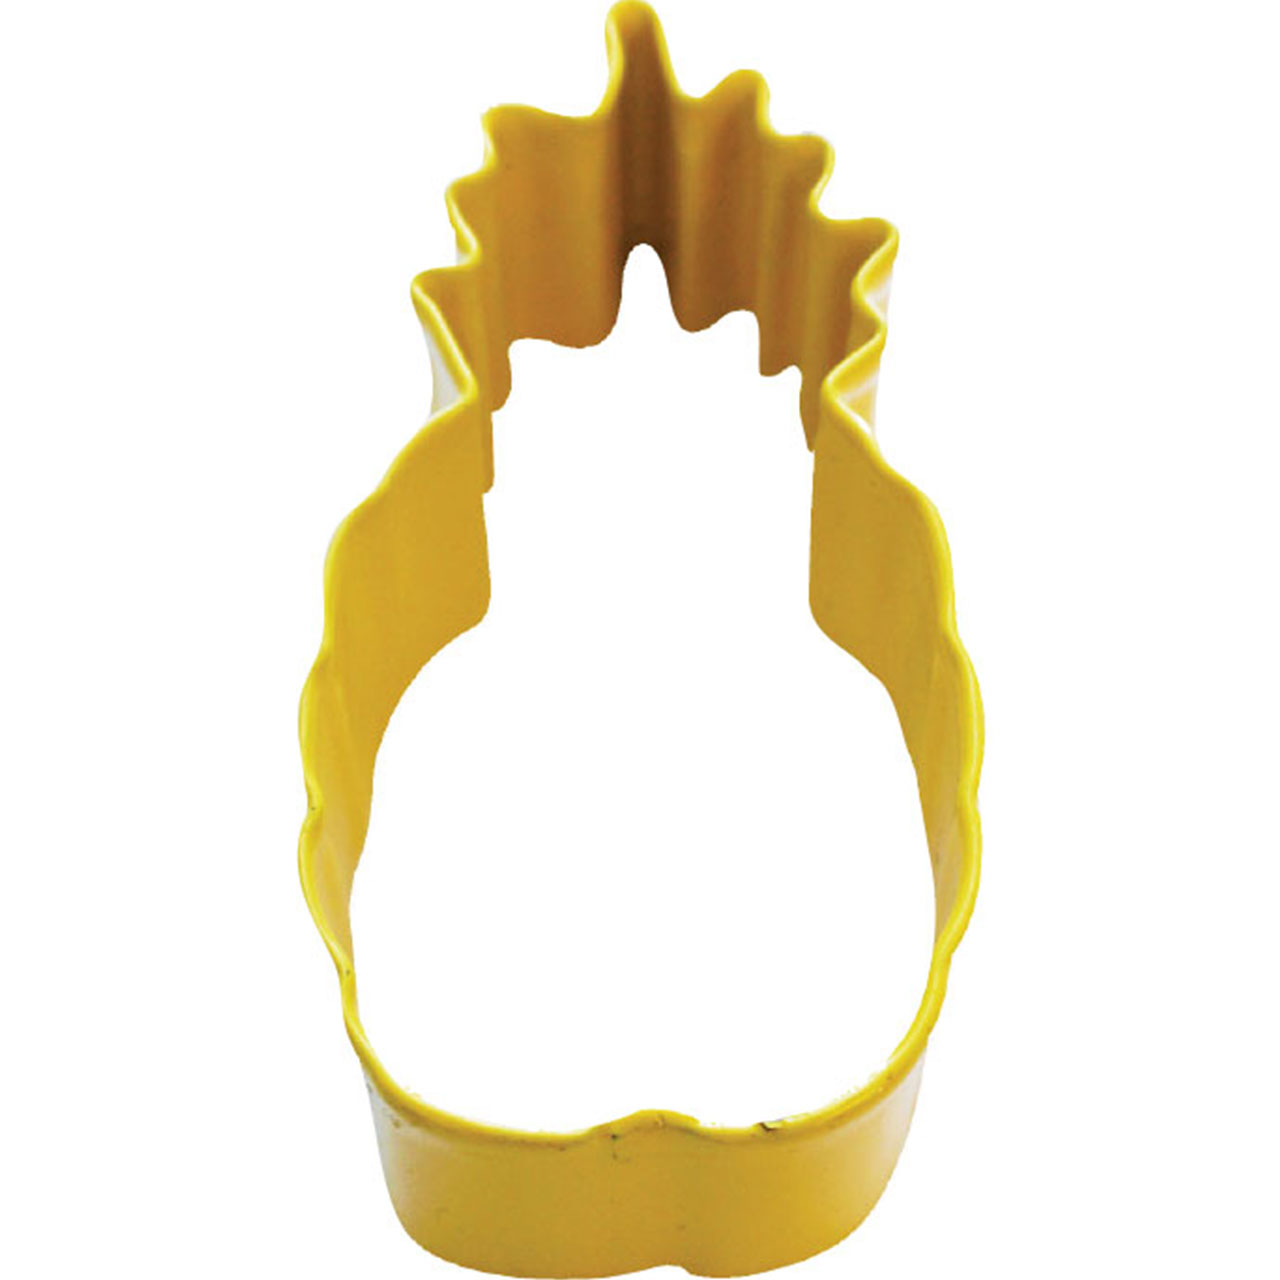  Cookie Cutter - Pineapple